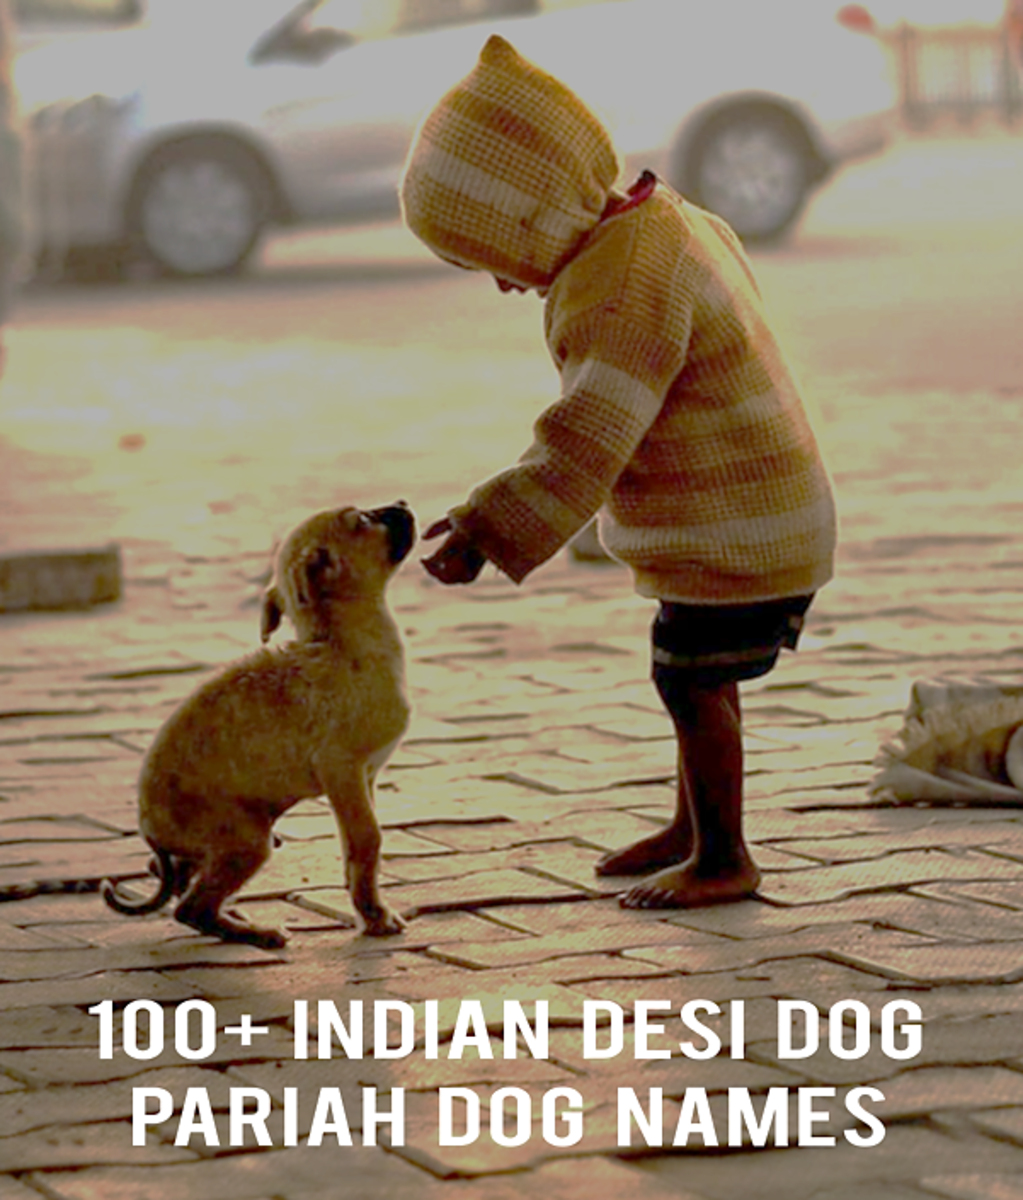 List of 100+ Names with Meaning for Indian Desi Dog or Pariah Dog